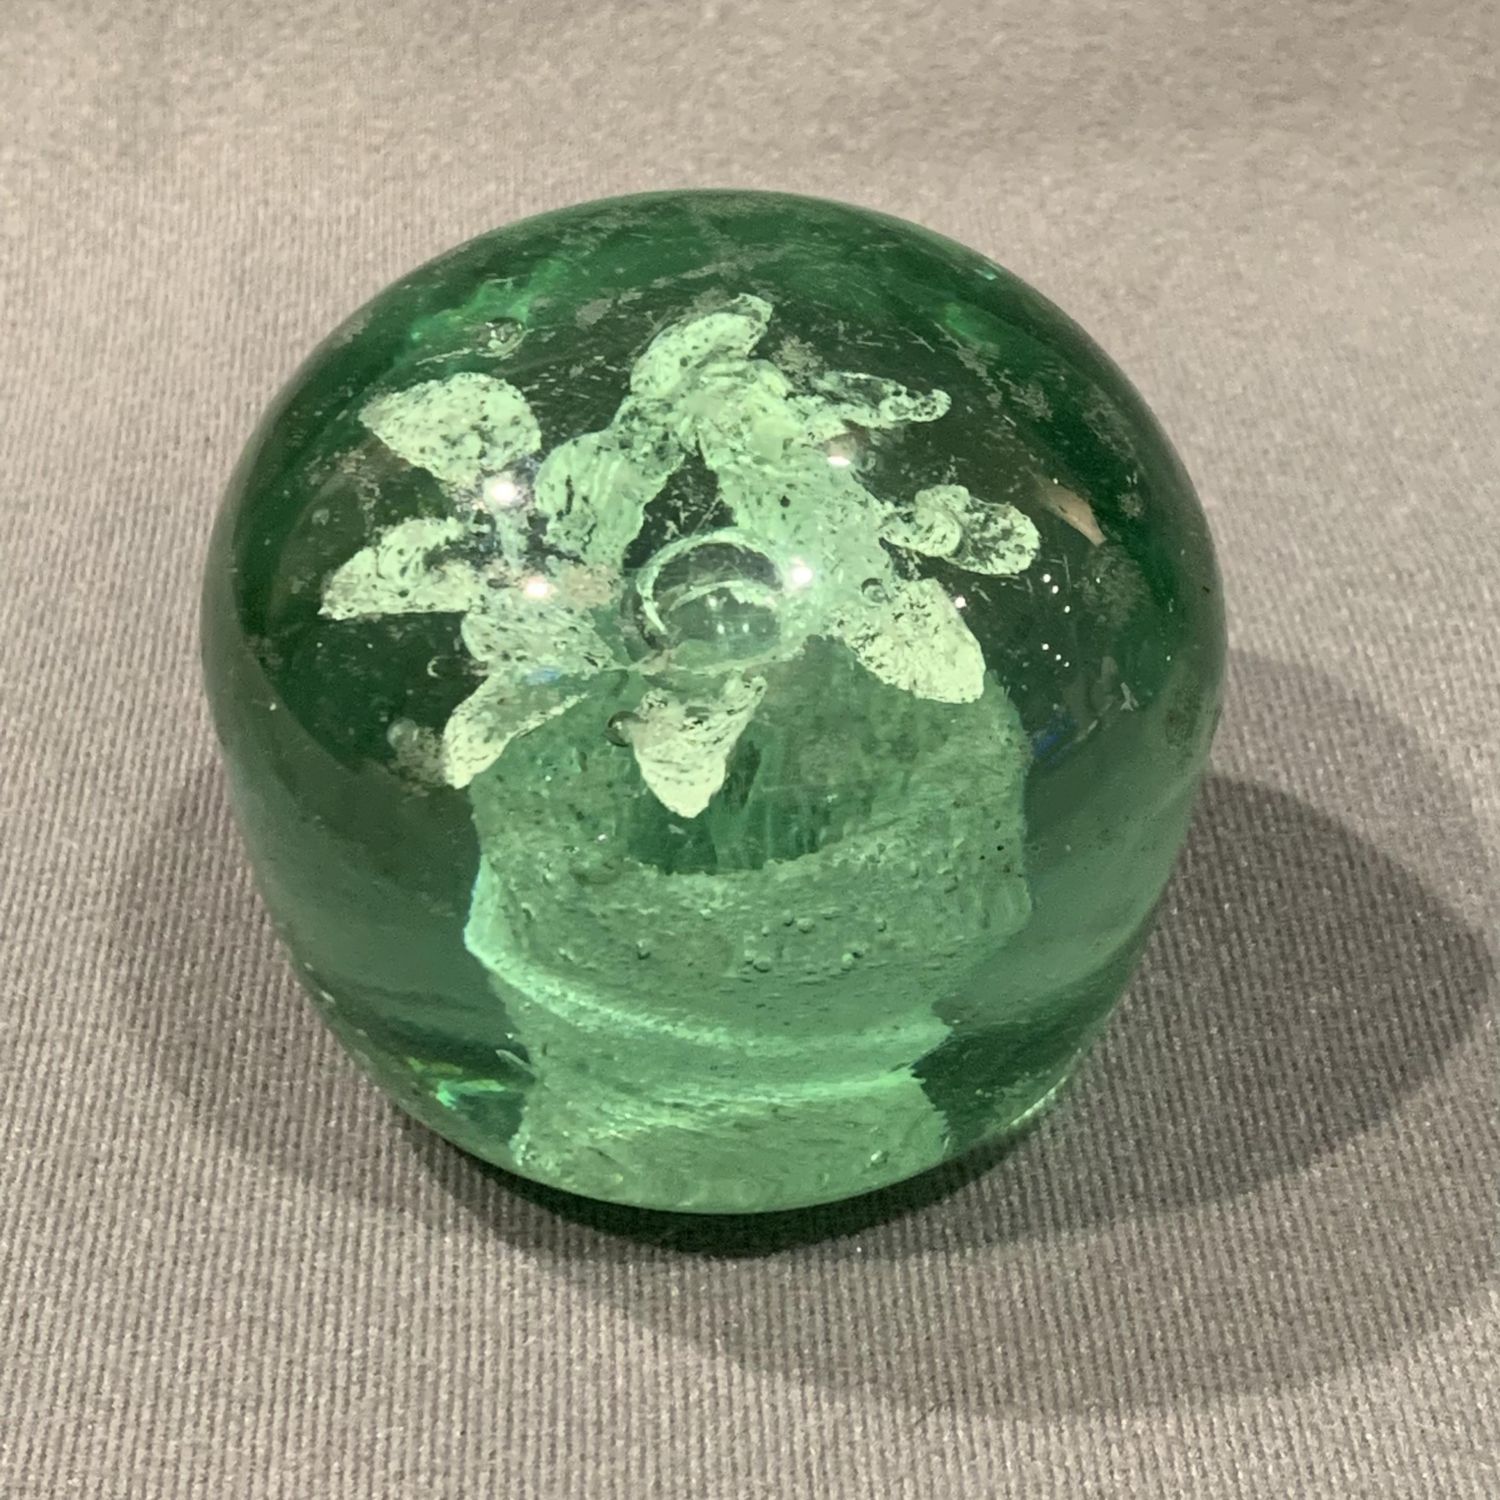 Victorian Glass Dump Weight - Antiques Posted for £15 - Hemswell ...